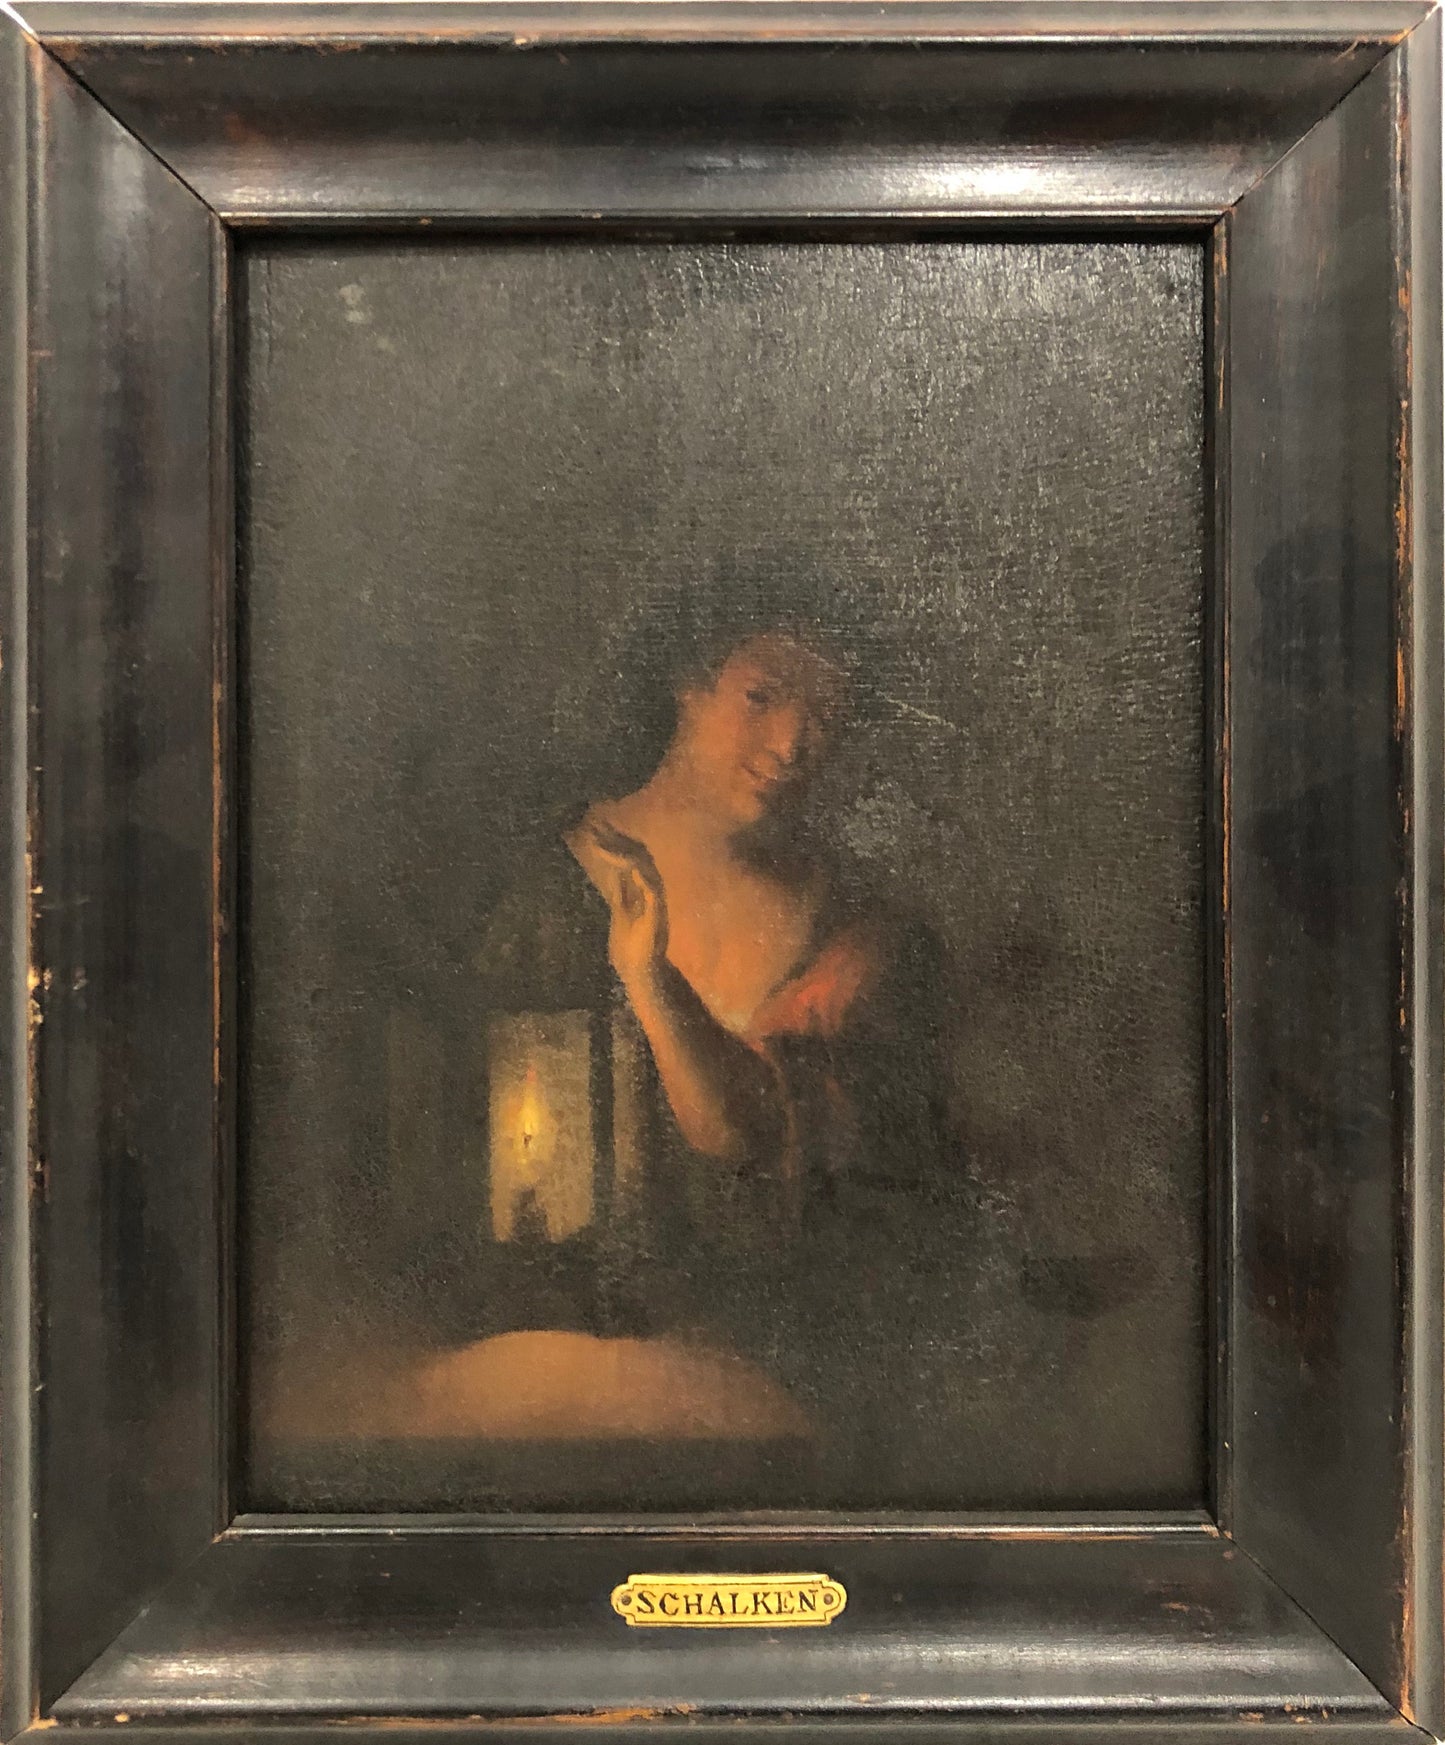 Godfried Schalken Oil Painting: Portrait of a Woman in candlelight